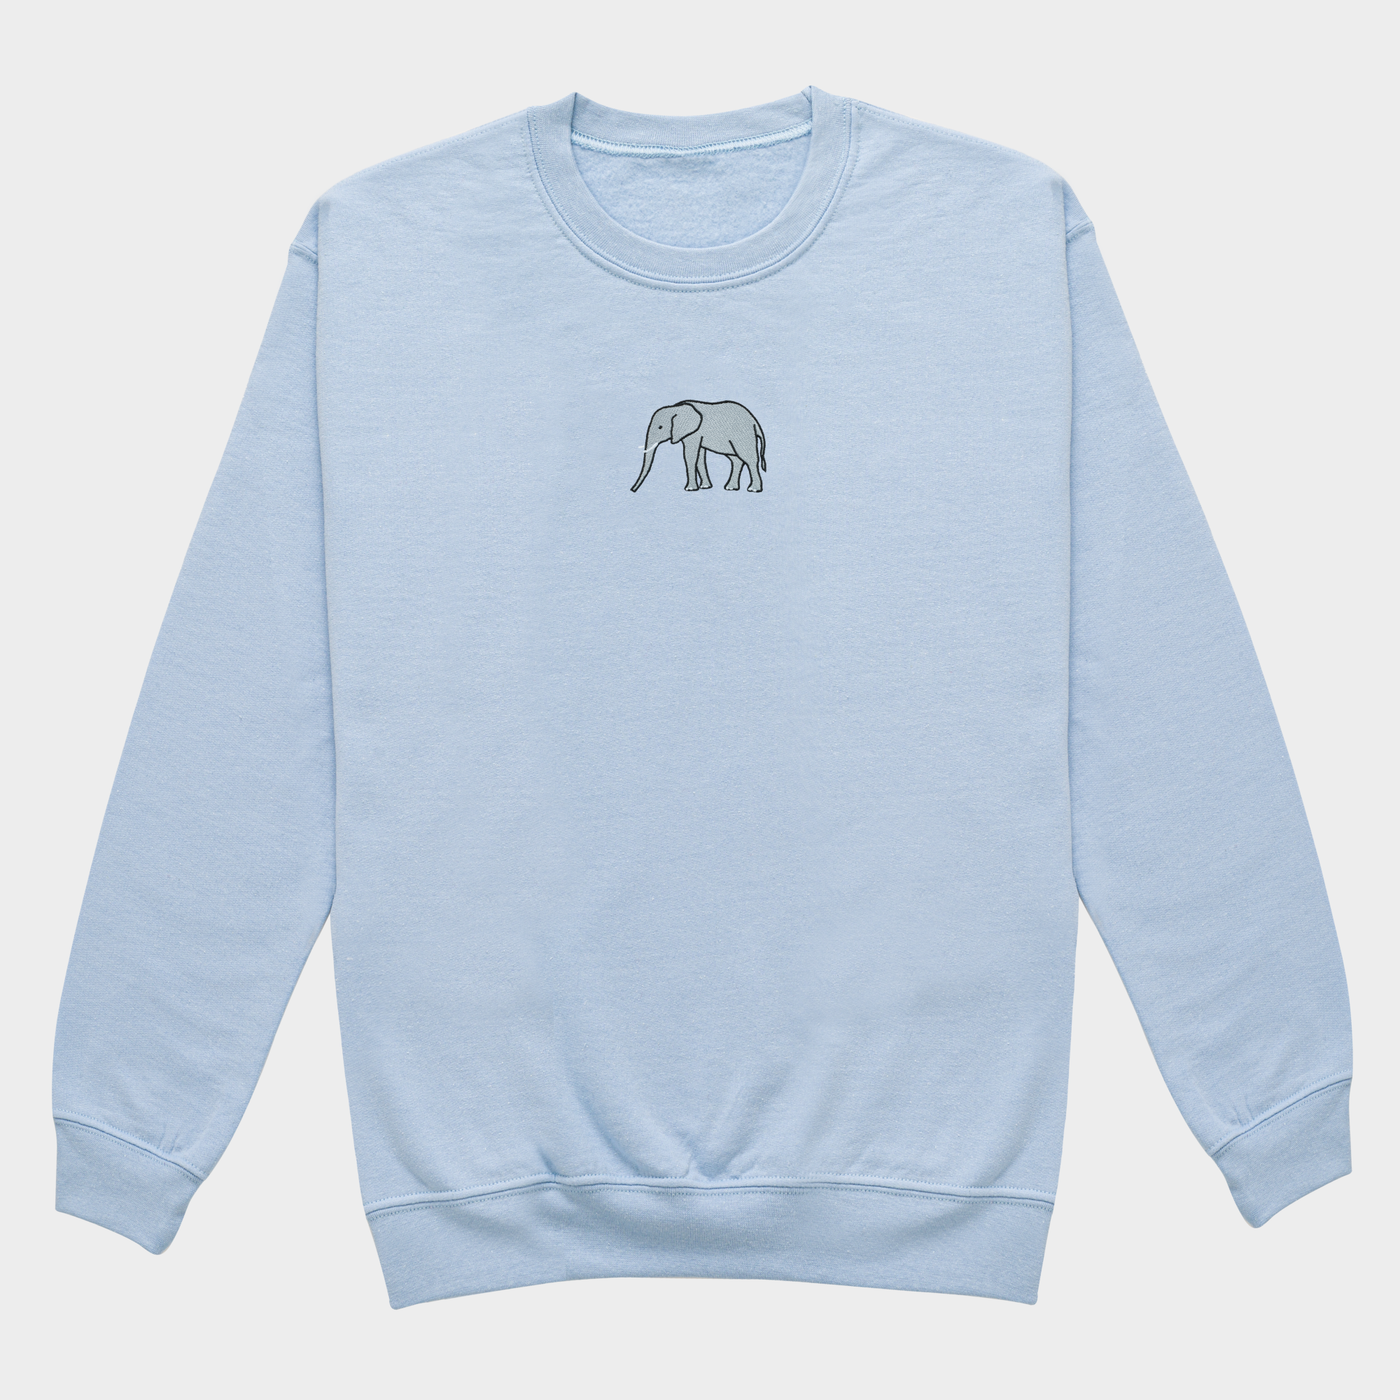 Bobby's Planet Women's Embroidered Elephant Sweatshirt from African Animals Collection in Light Blue Color#color_light-blue